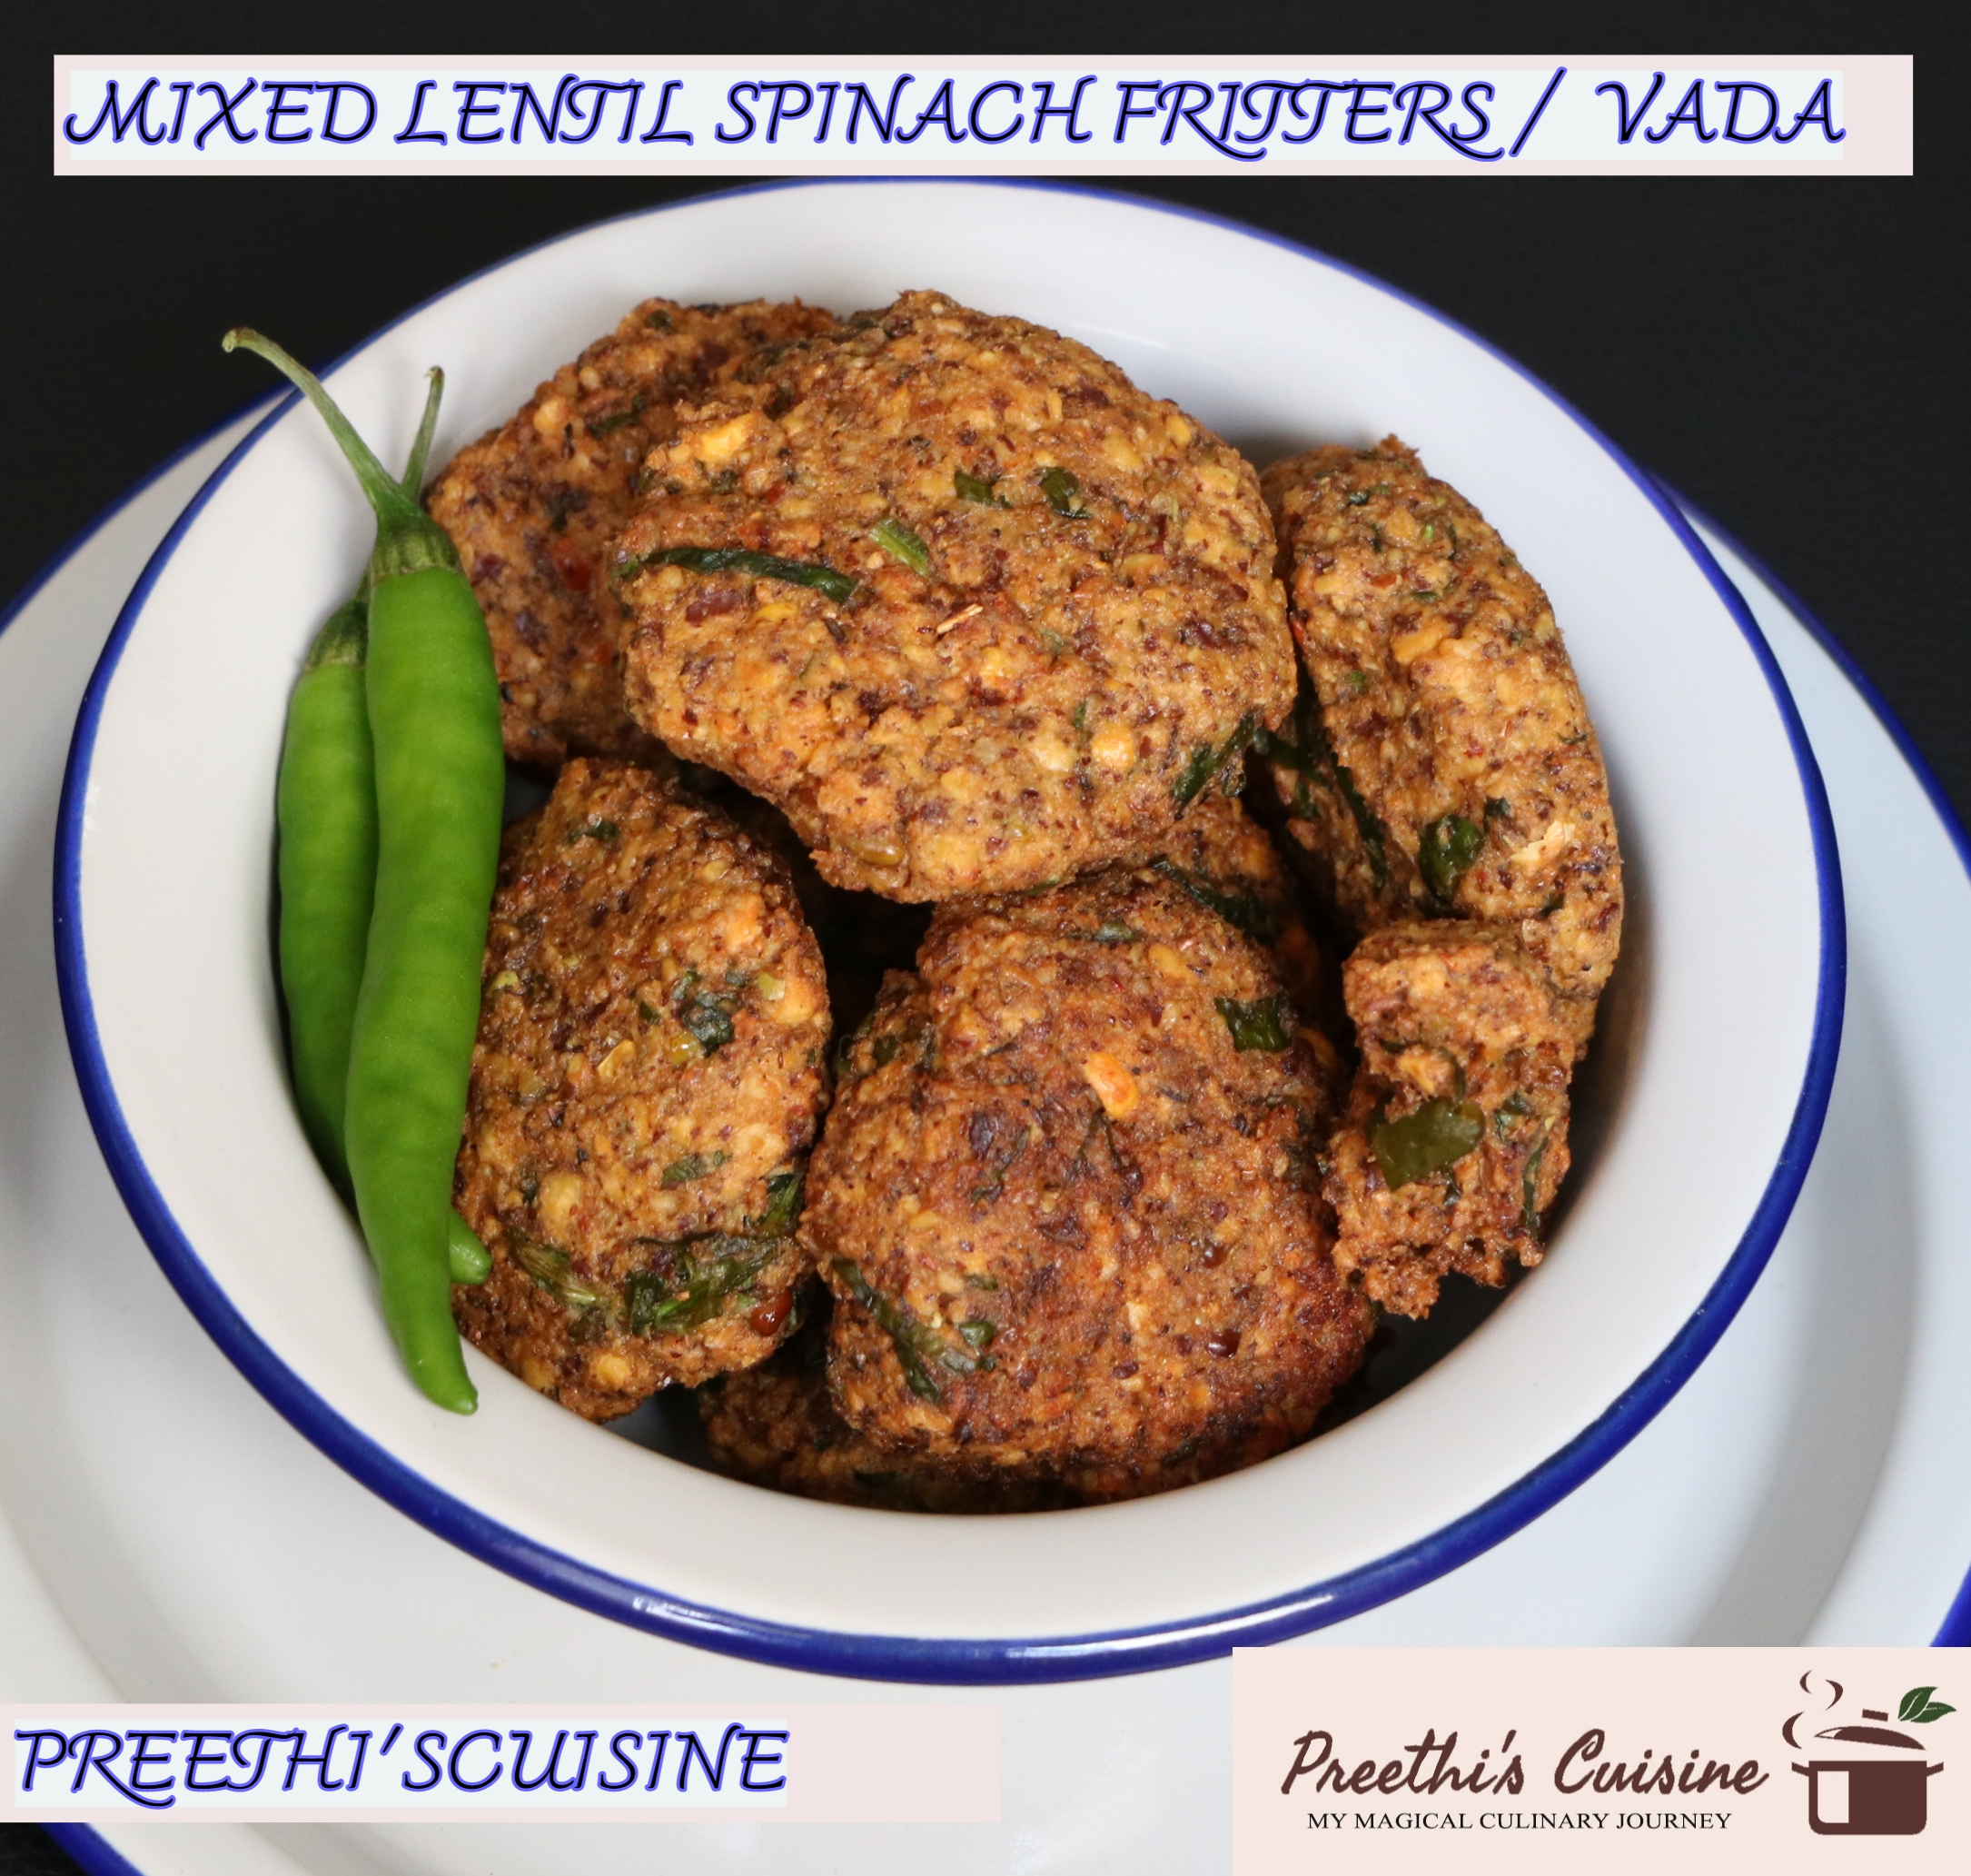 MIXED LENTIL SPINACH FRITTERS / VADA